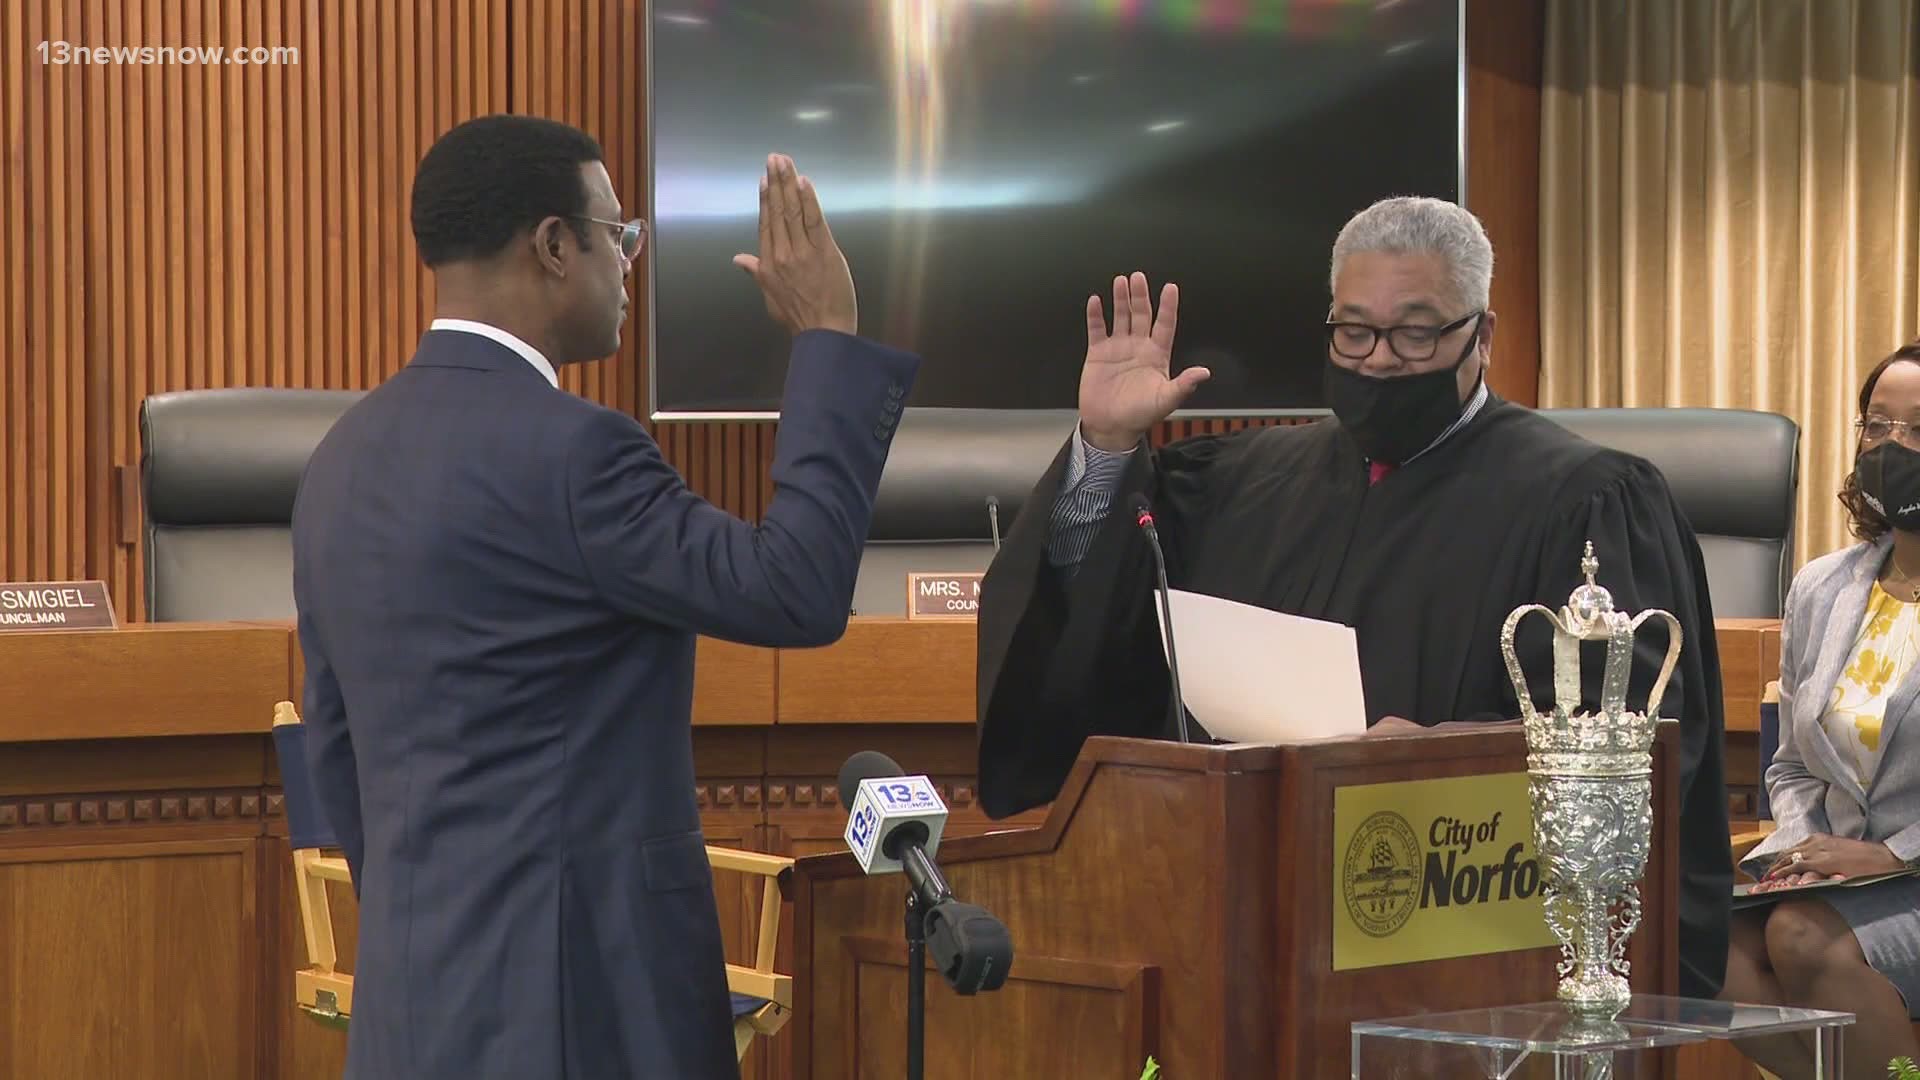 Alexander is the city's first African American mayor. Two councilwomen also took their oaths of office.